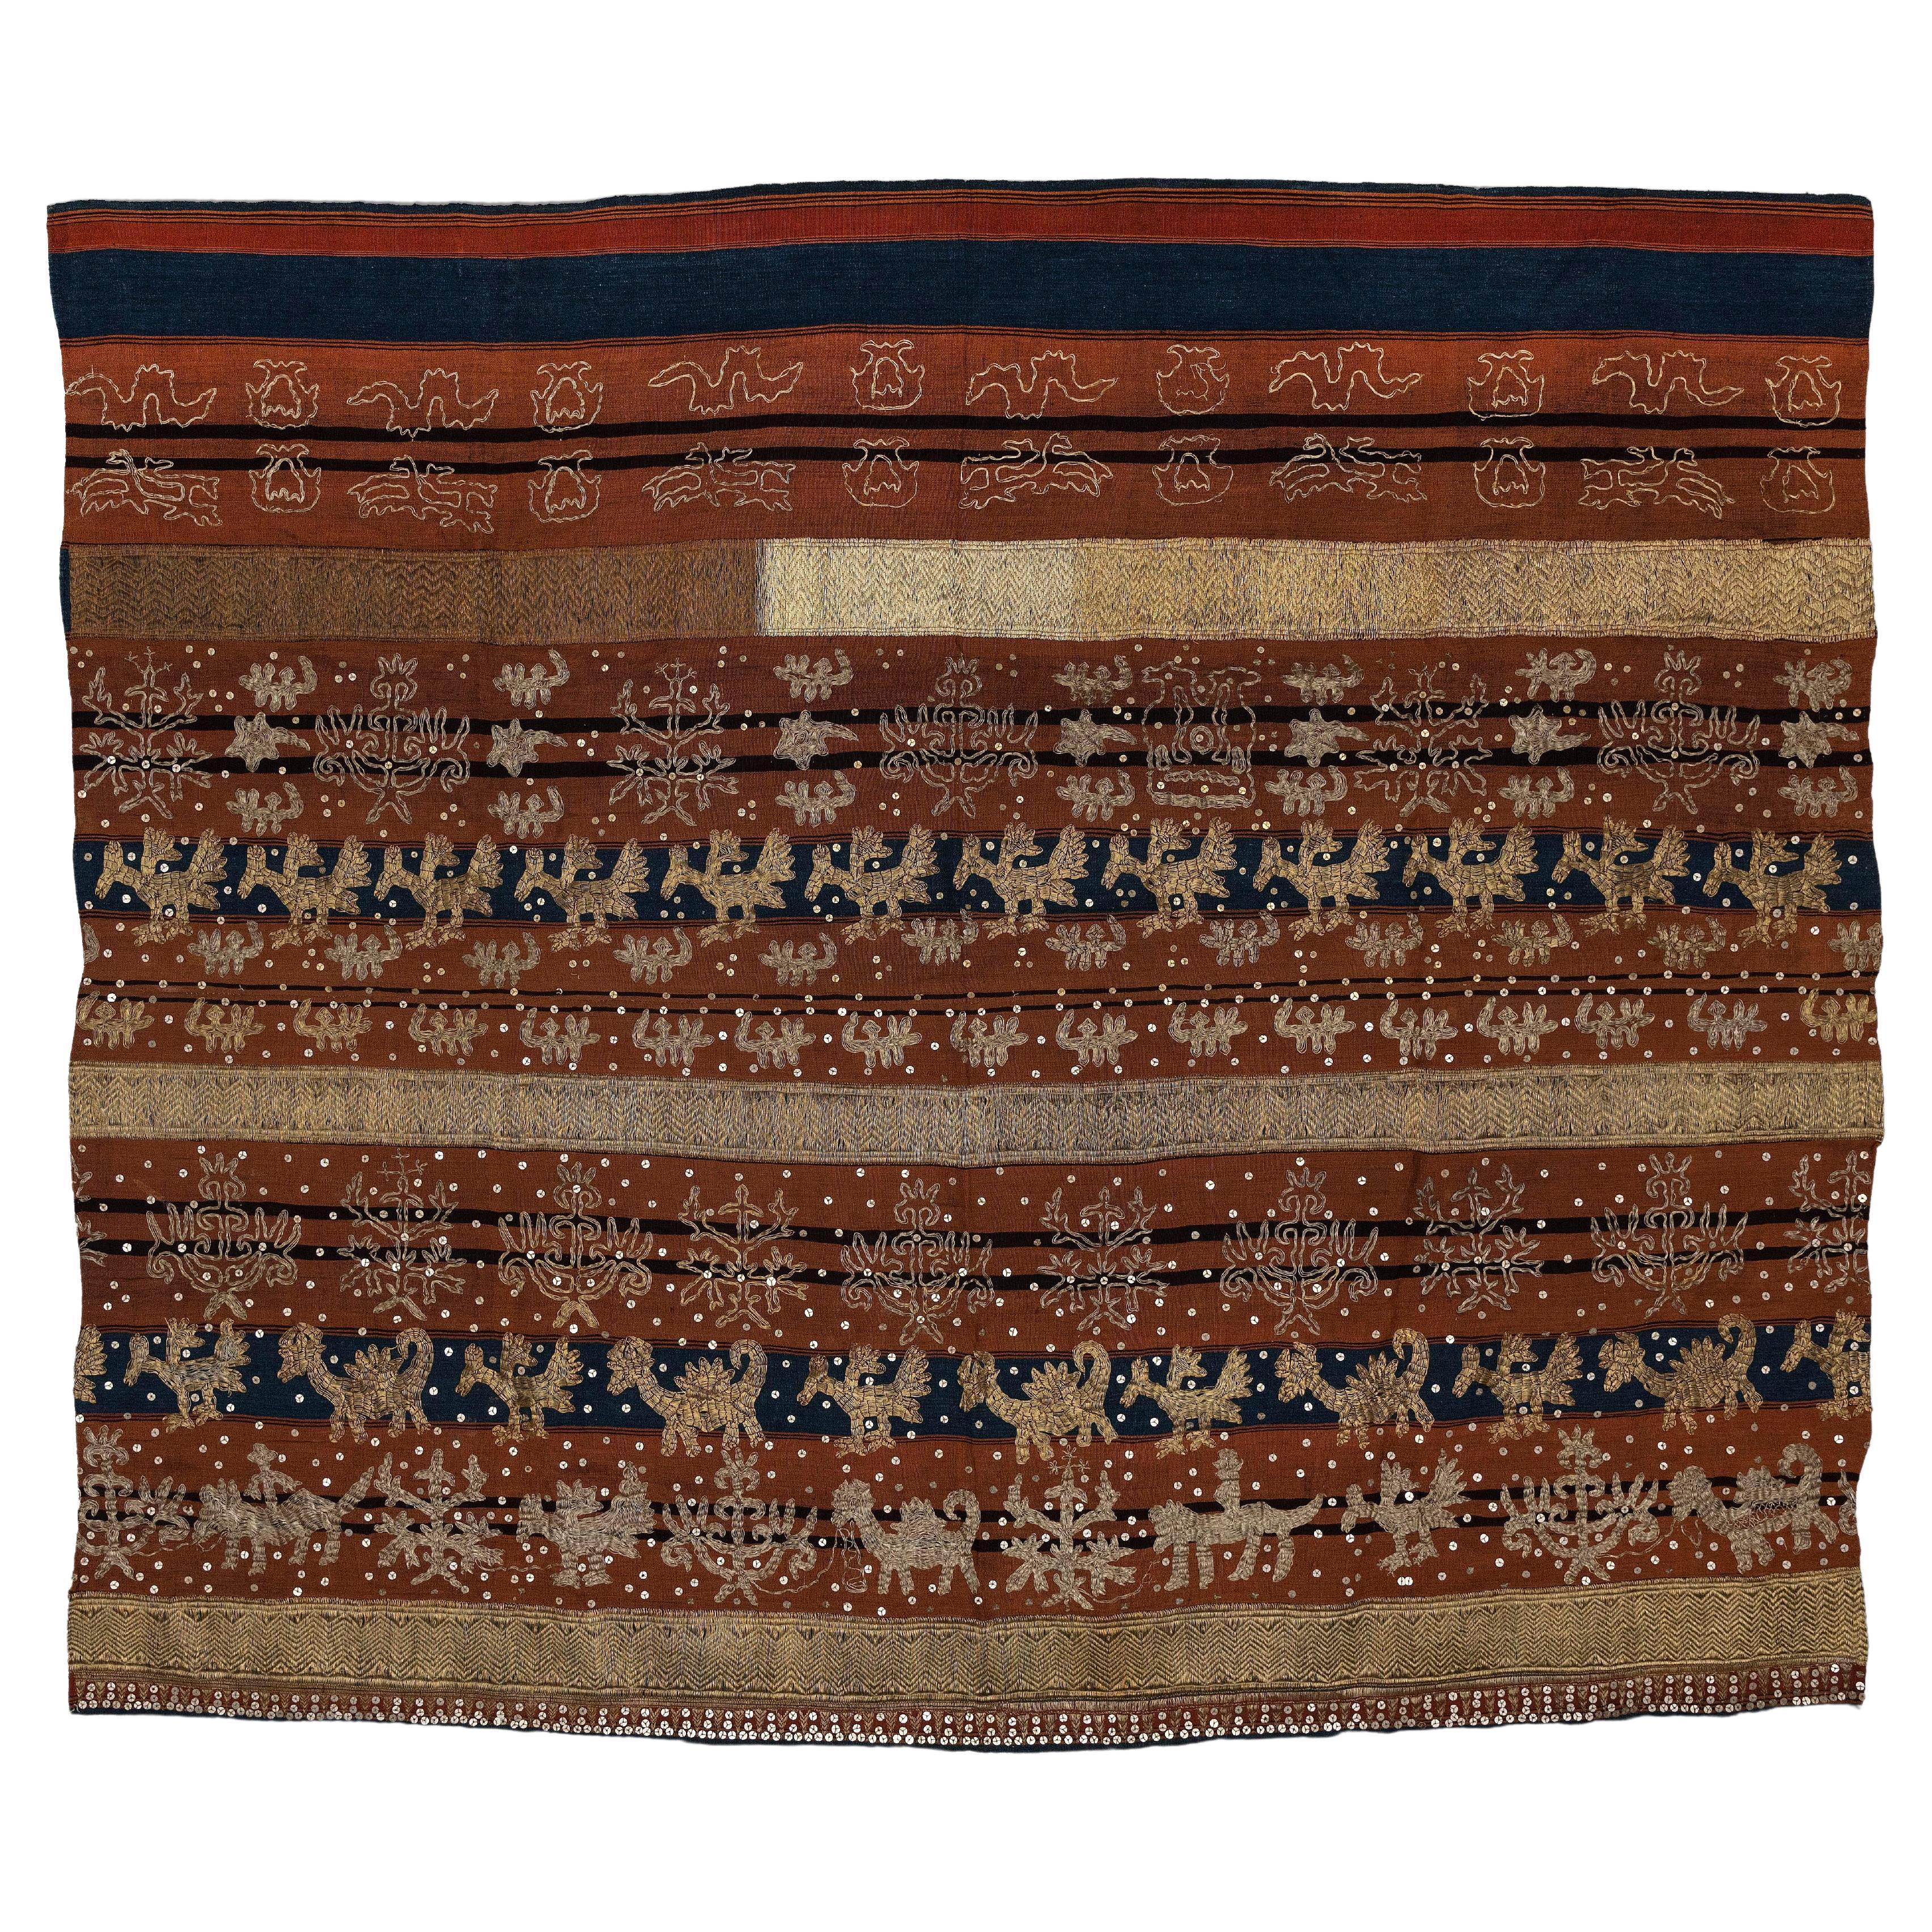 Ceremonial Cloth 'Tapis' of Lampung For Sale